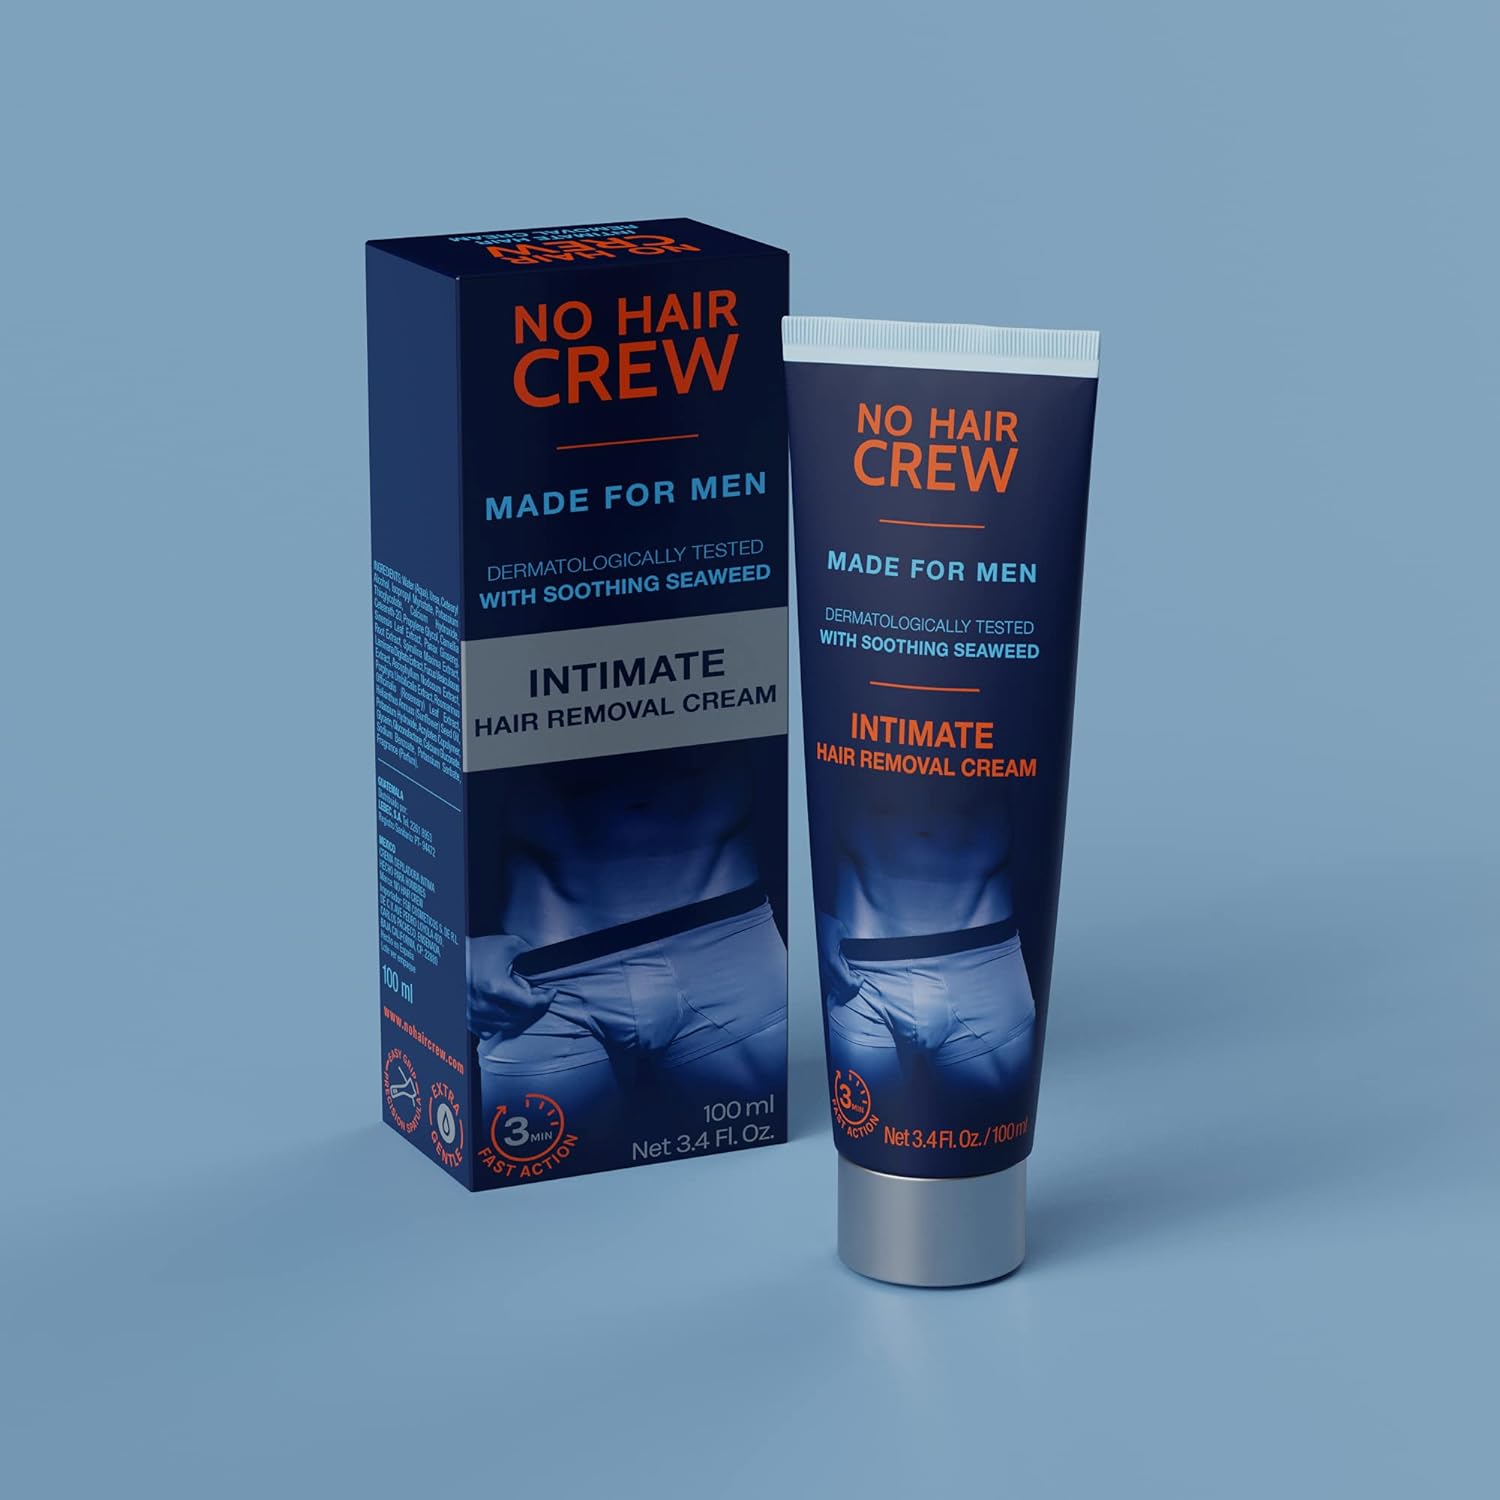 No Hair Crew Intimate/Private At Home Hair Removal Cream for Men - Painless, Flawless, Soothing Depilatory for Manscaping Unwanted Coarse Male Body Hair, 100ml (2 Pack) : Beauty & Personal Care